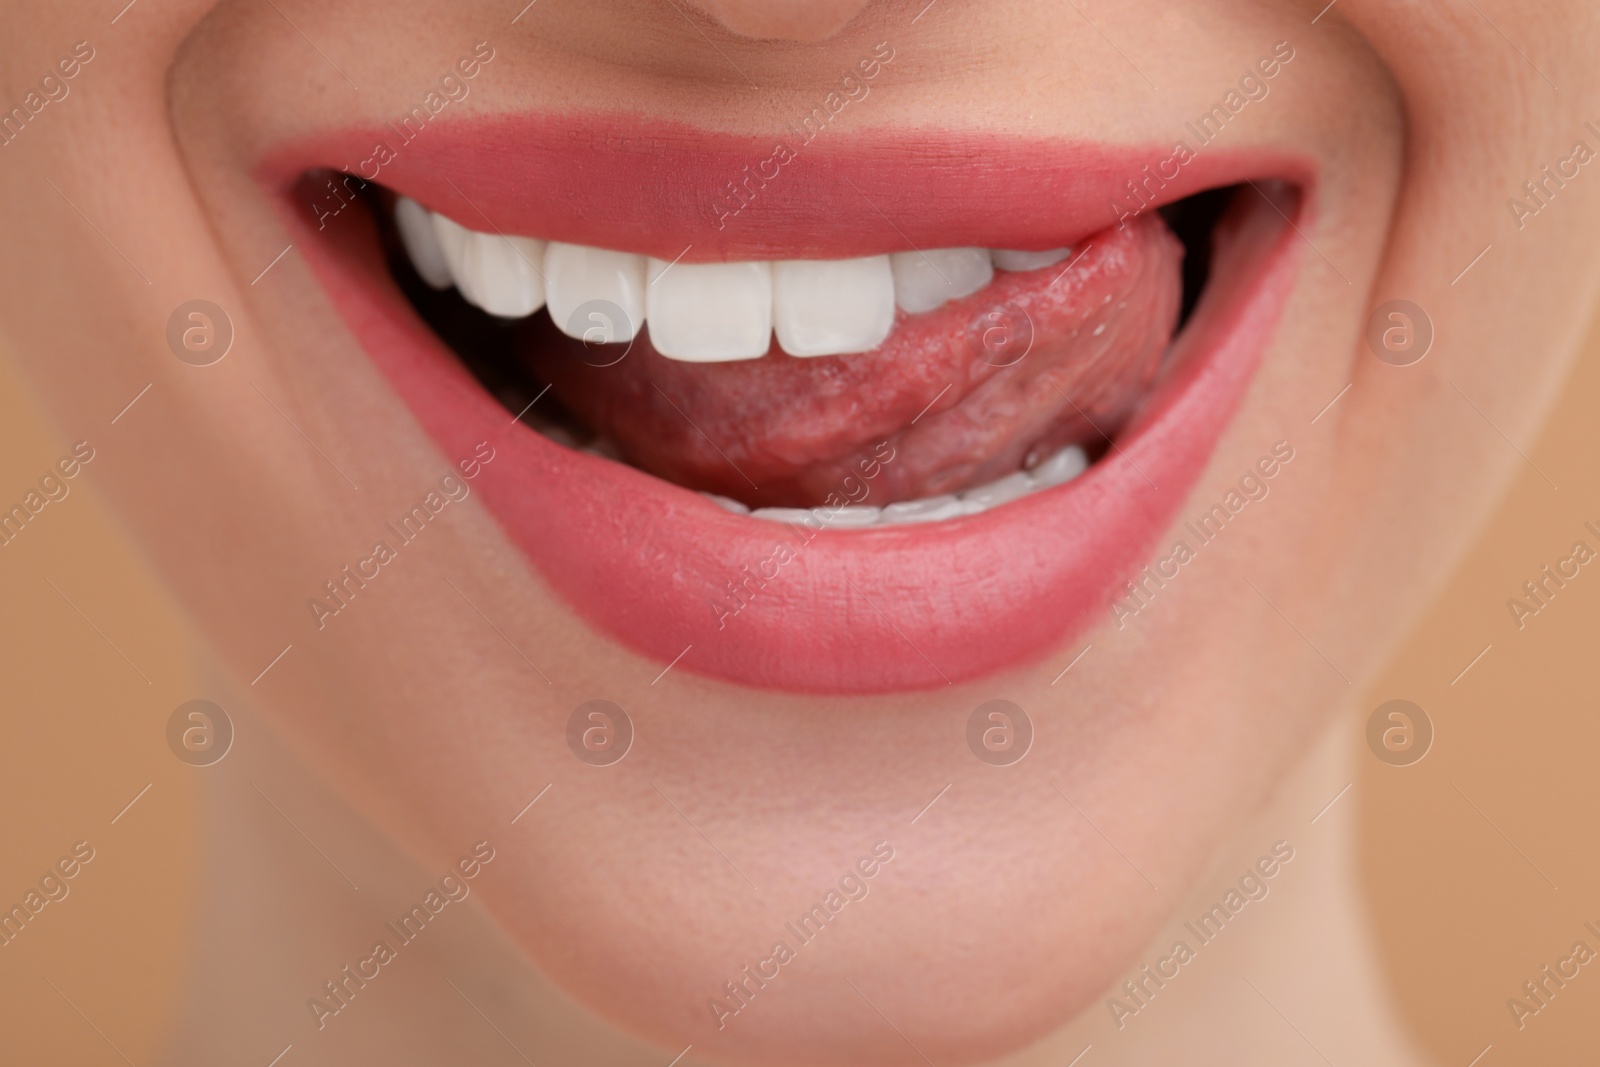 Photo of Young woman licking her teeth on beige background, closeup